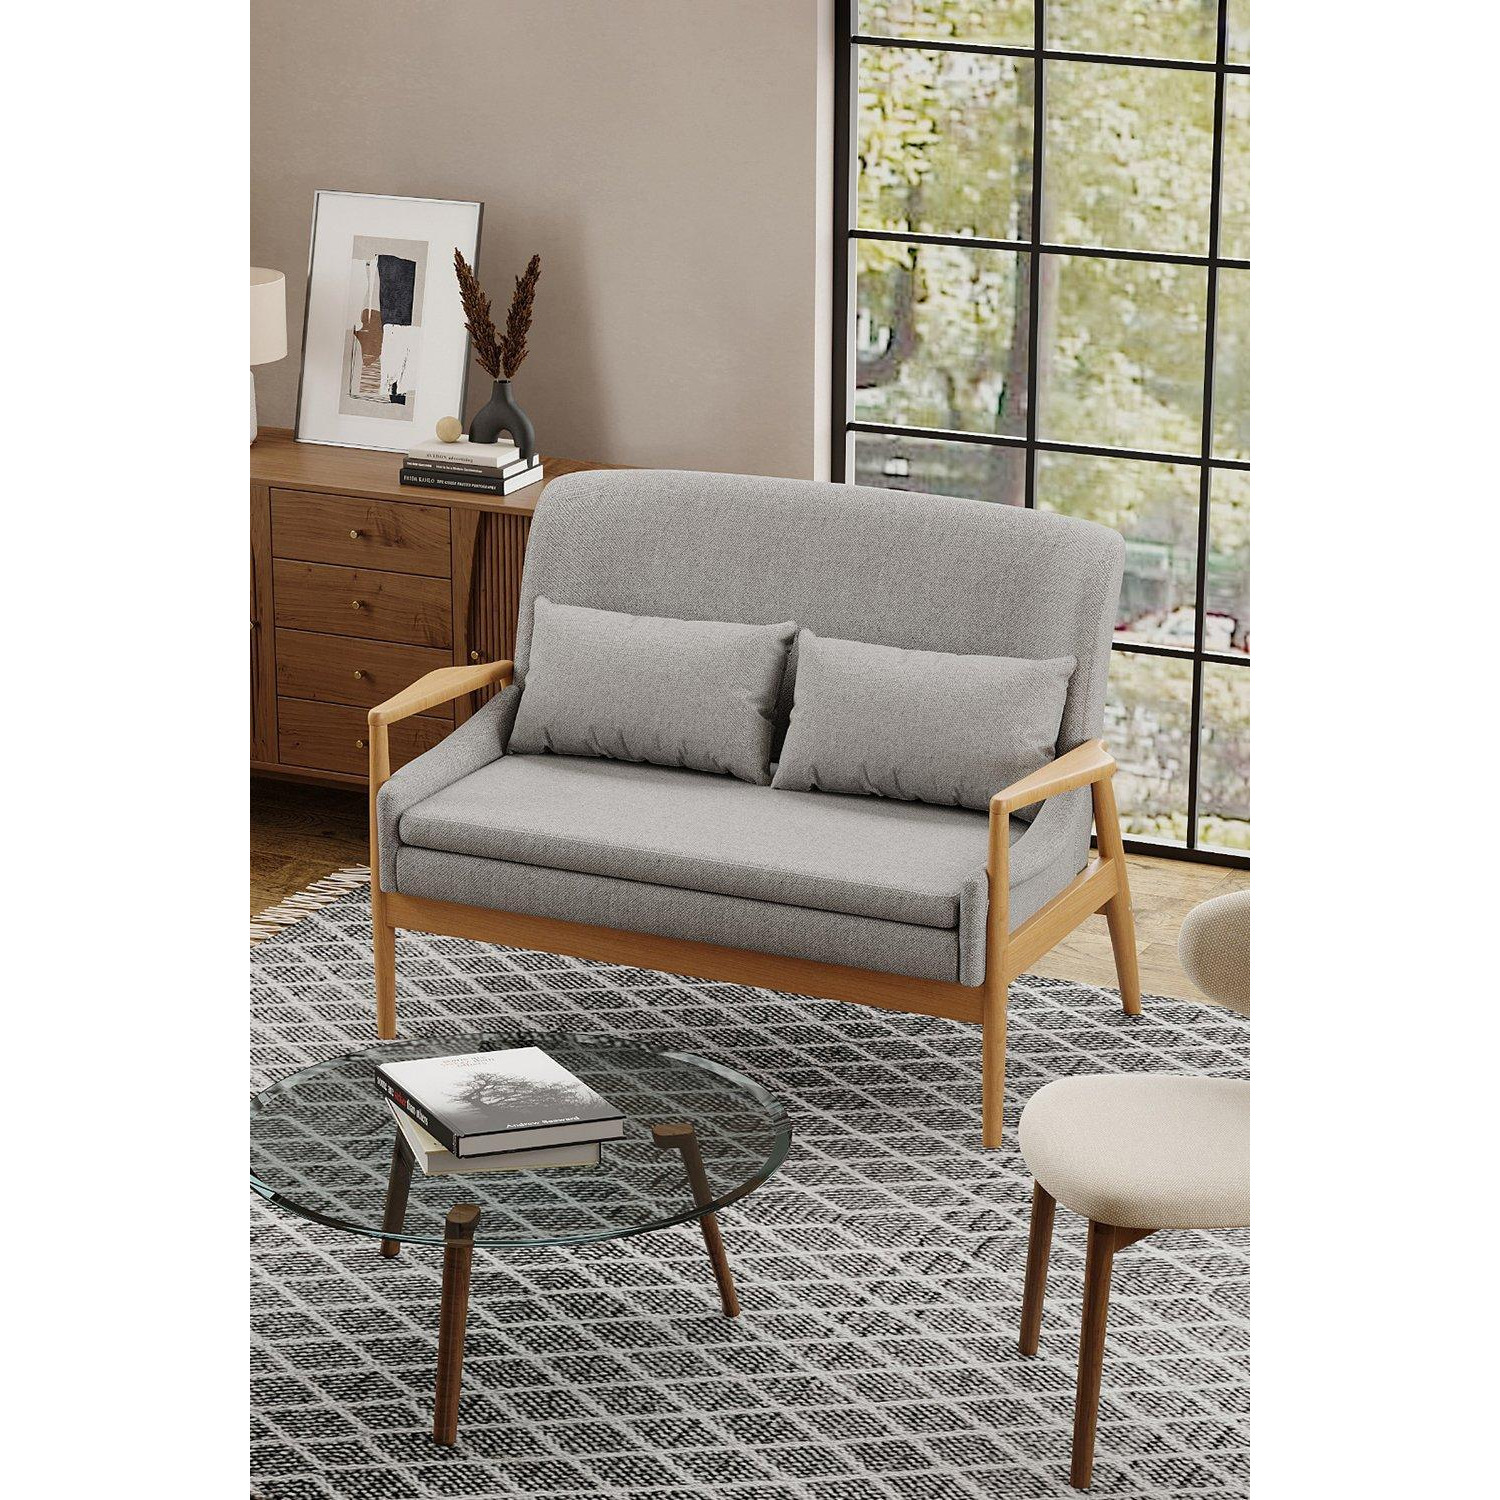 2-Seater Loveseat with Throw Pillows - image 1